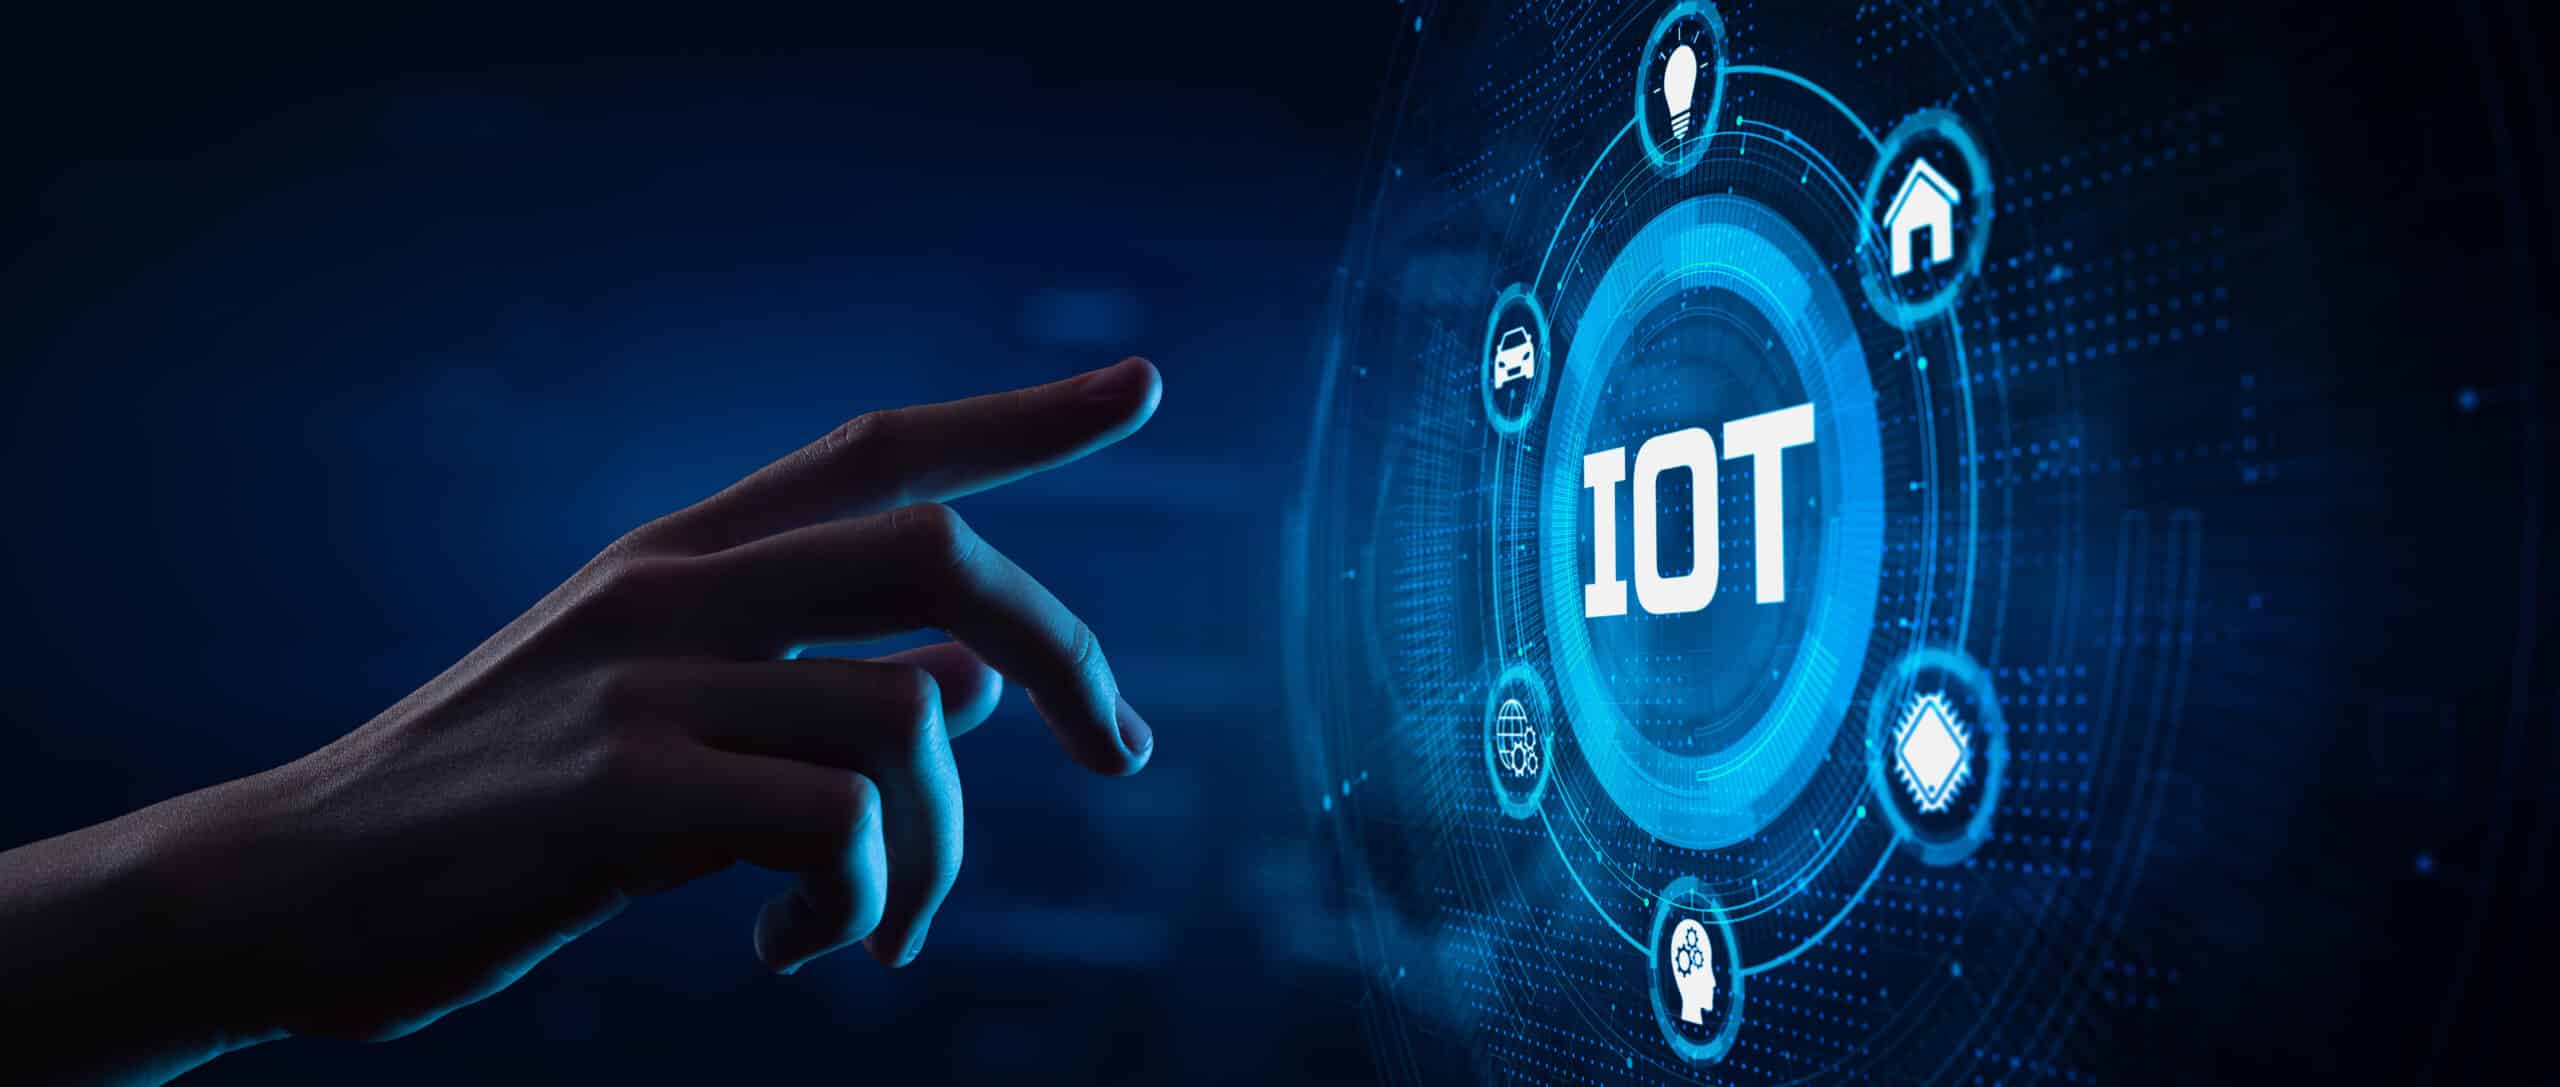 digital hand pointing towards IOT graphic